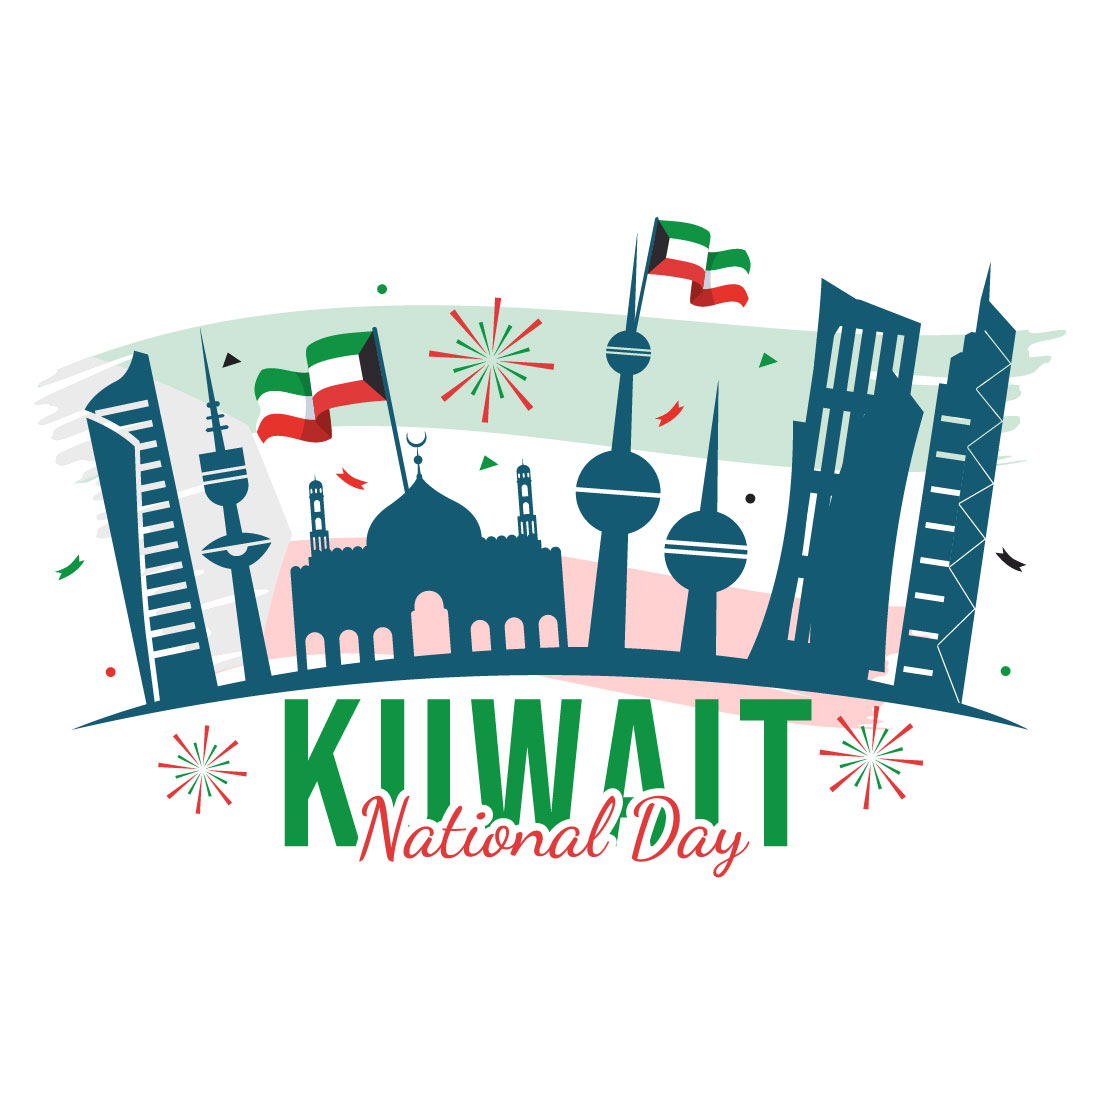 12 National Kuwait Day Illustration preview image.